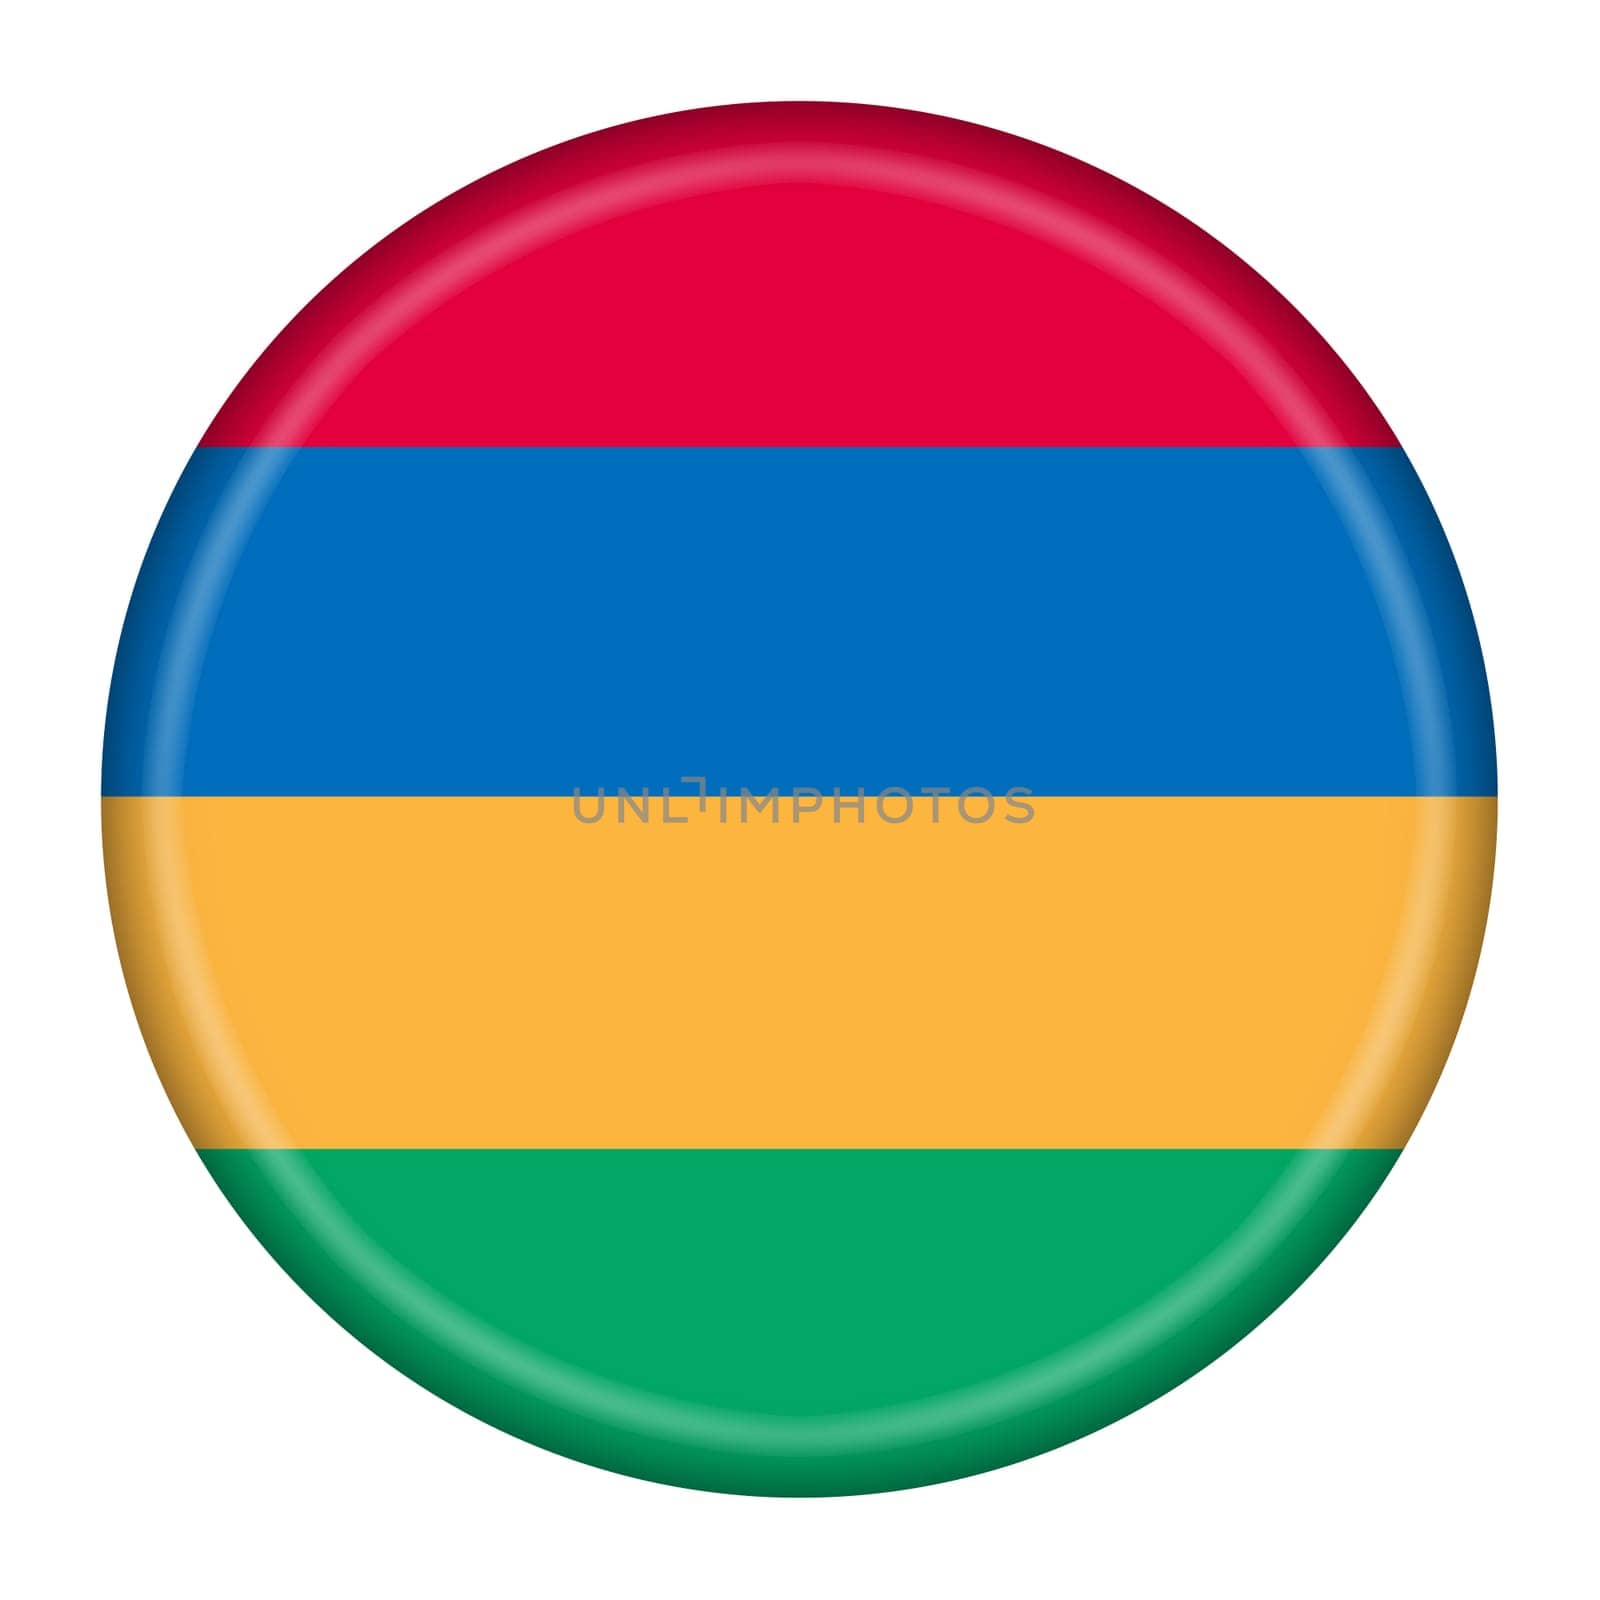 A Mauritius flag button 3d illustration with clipping path by VivacityImages